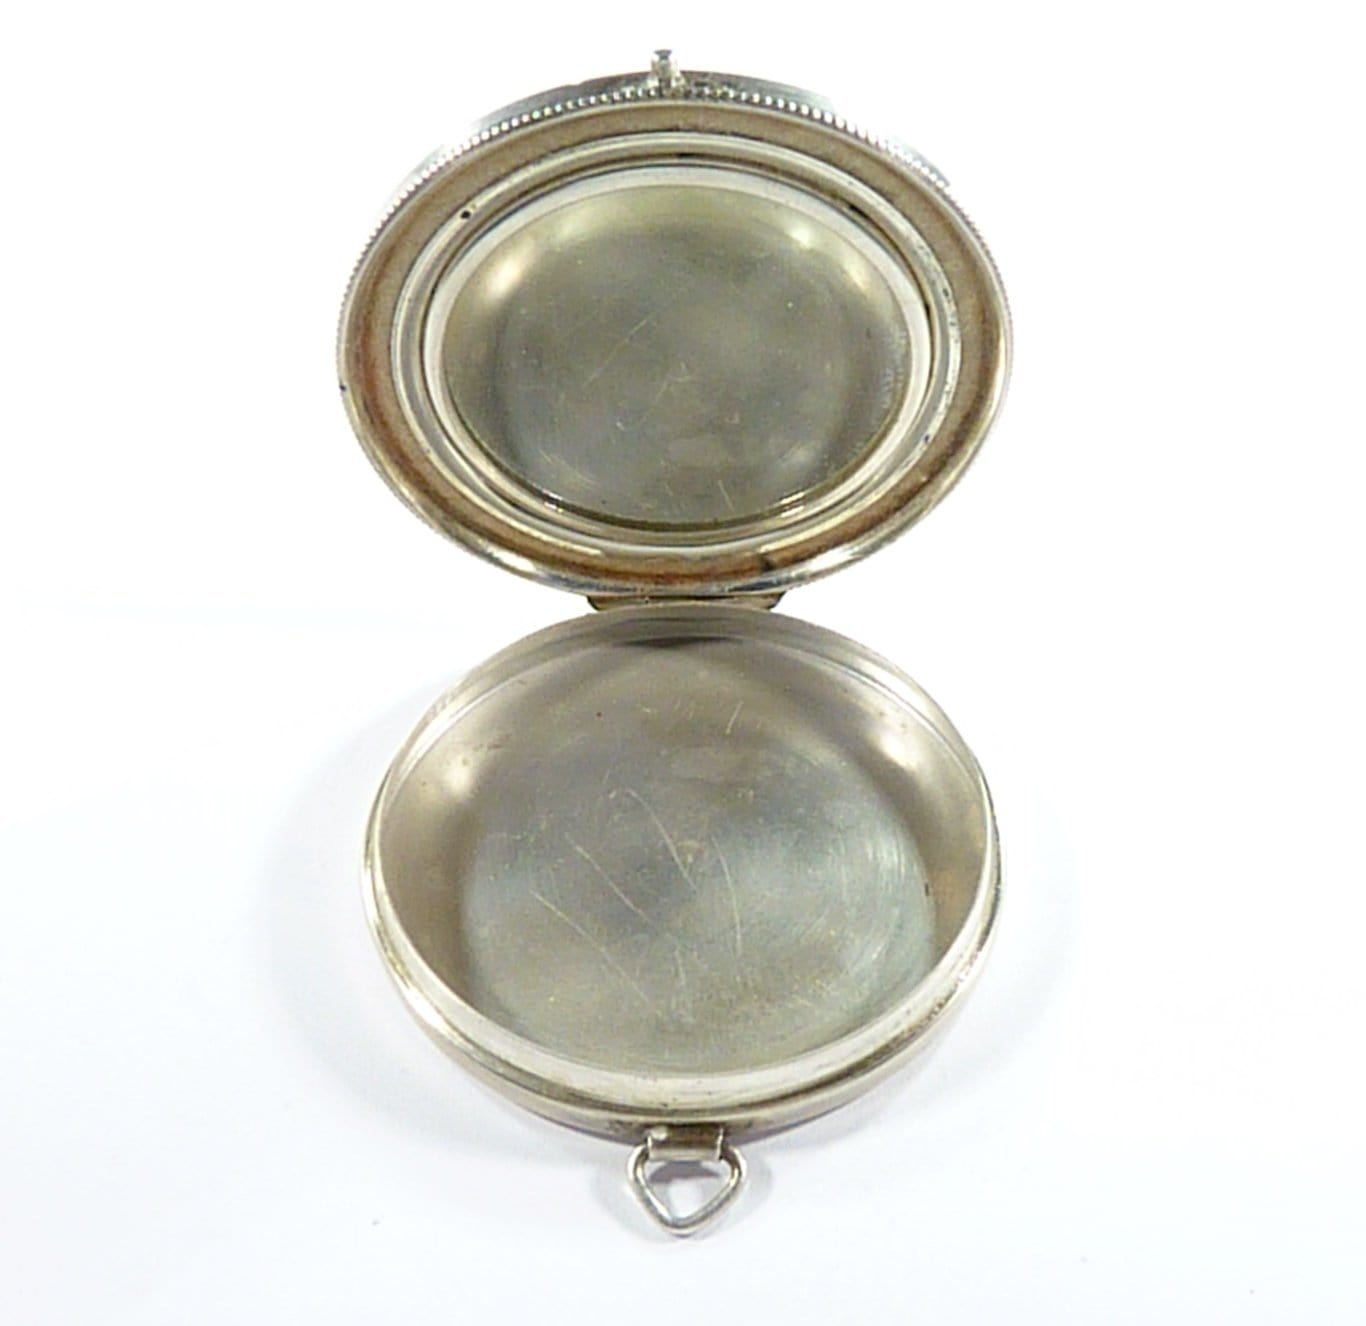 MORGES Antique Pearls Round Vintage Compact Purse Mirror - Price in India,  Buy MORGES Antique Pearls Round Vintage Compact Purse Mirror Online In  India, Reviews, Ratings & Features | Flipkart.com